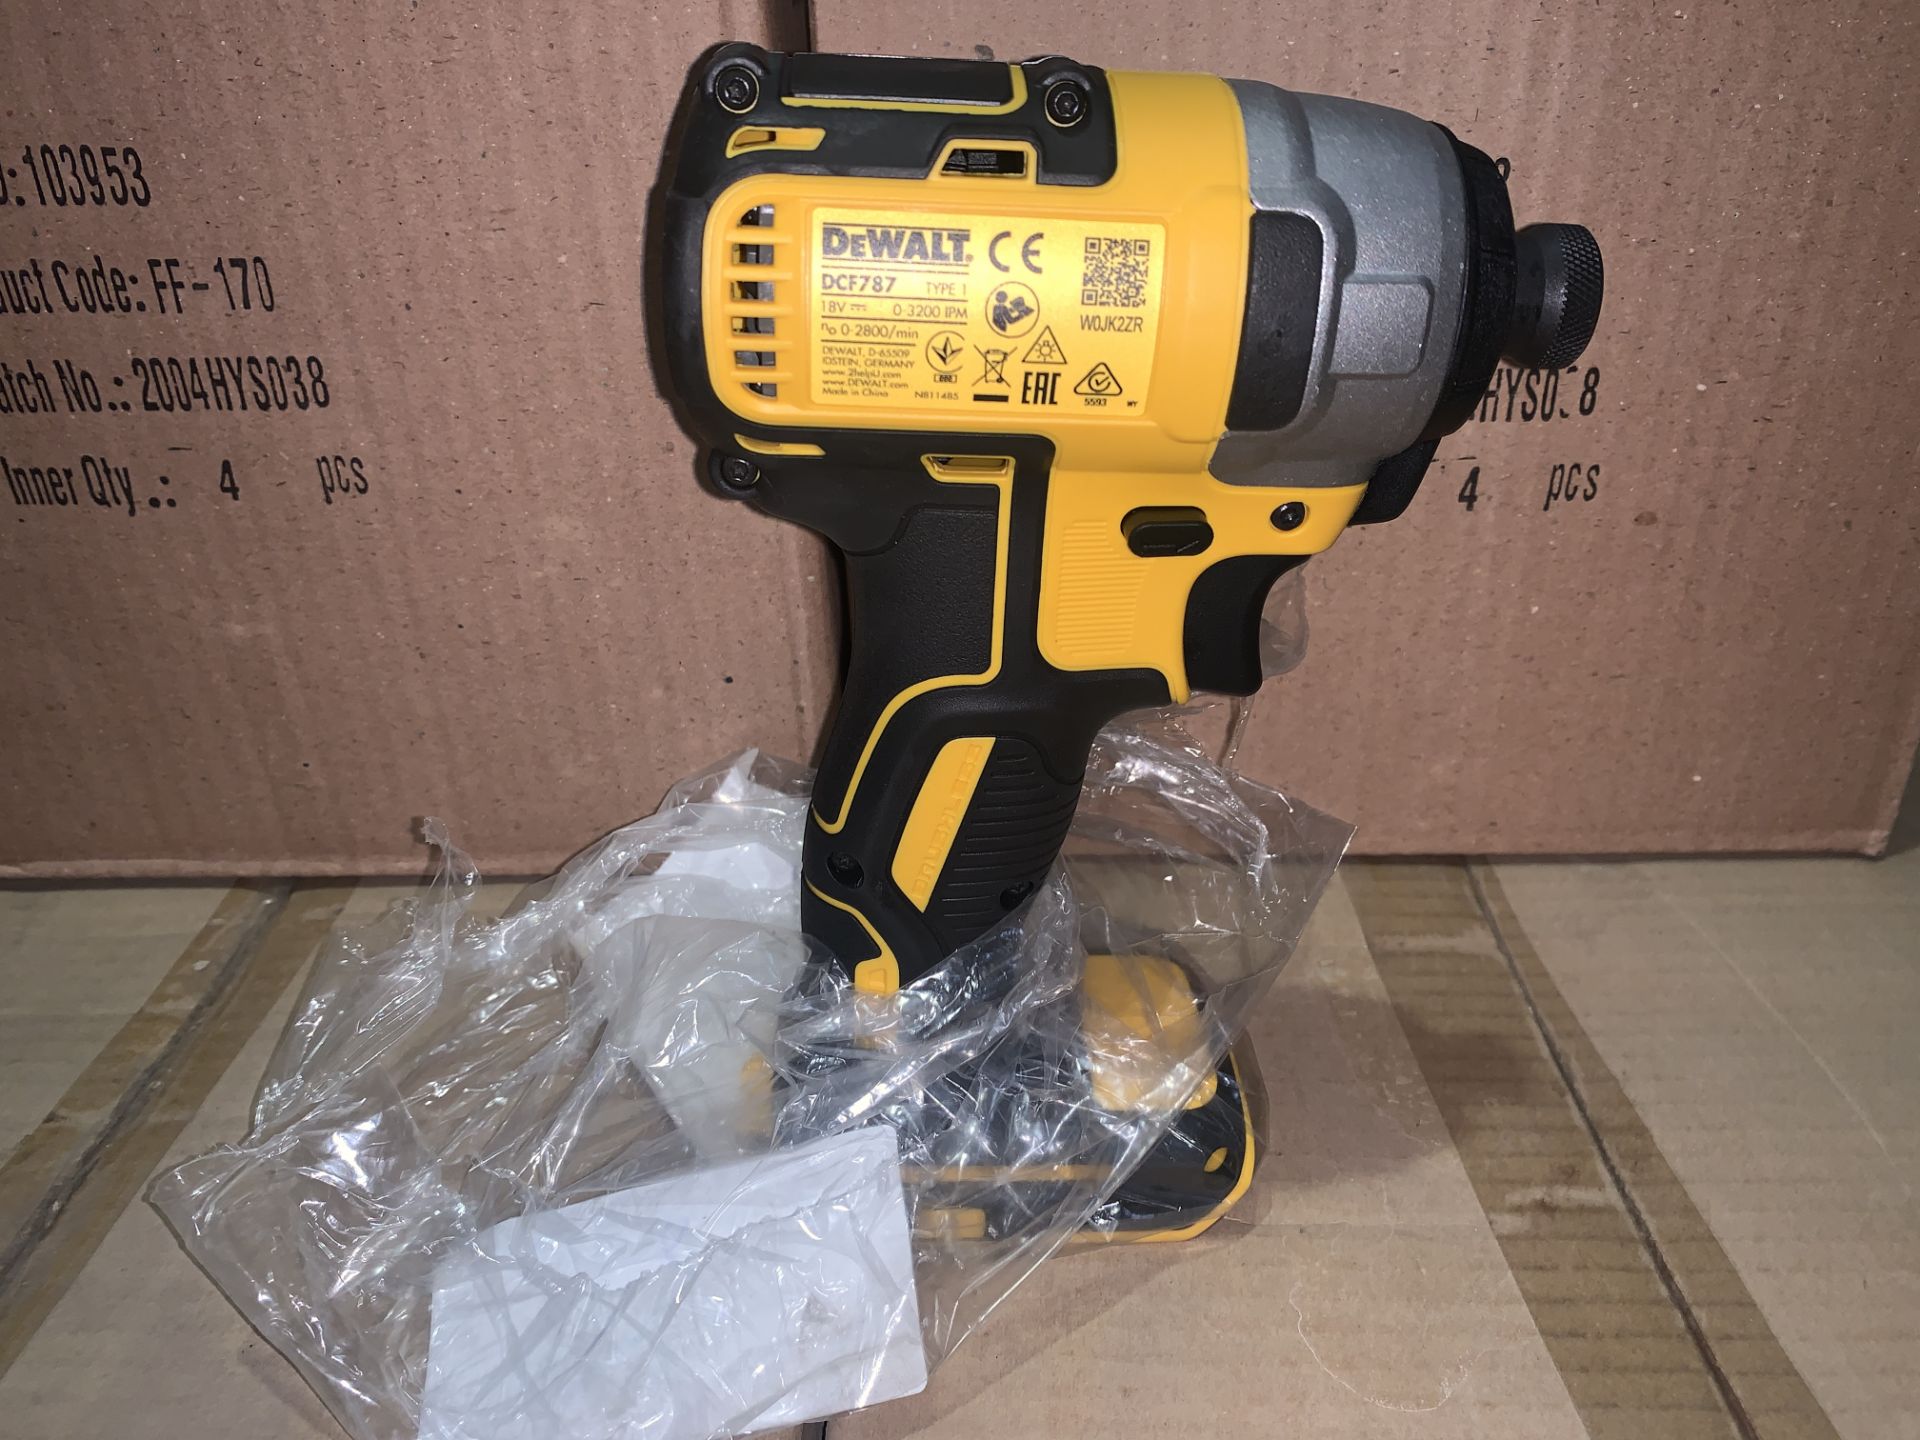 DEWALT DCF787D2T-SFGB 18V 2.0AH LI-ION XR BRUSHLESS CORDLESS IMPACT DRIVER (UNCHECKED / UNTESTED )